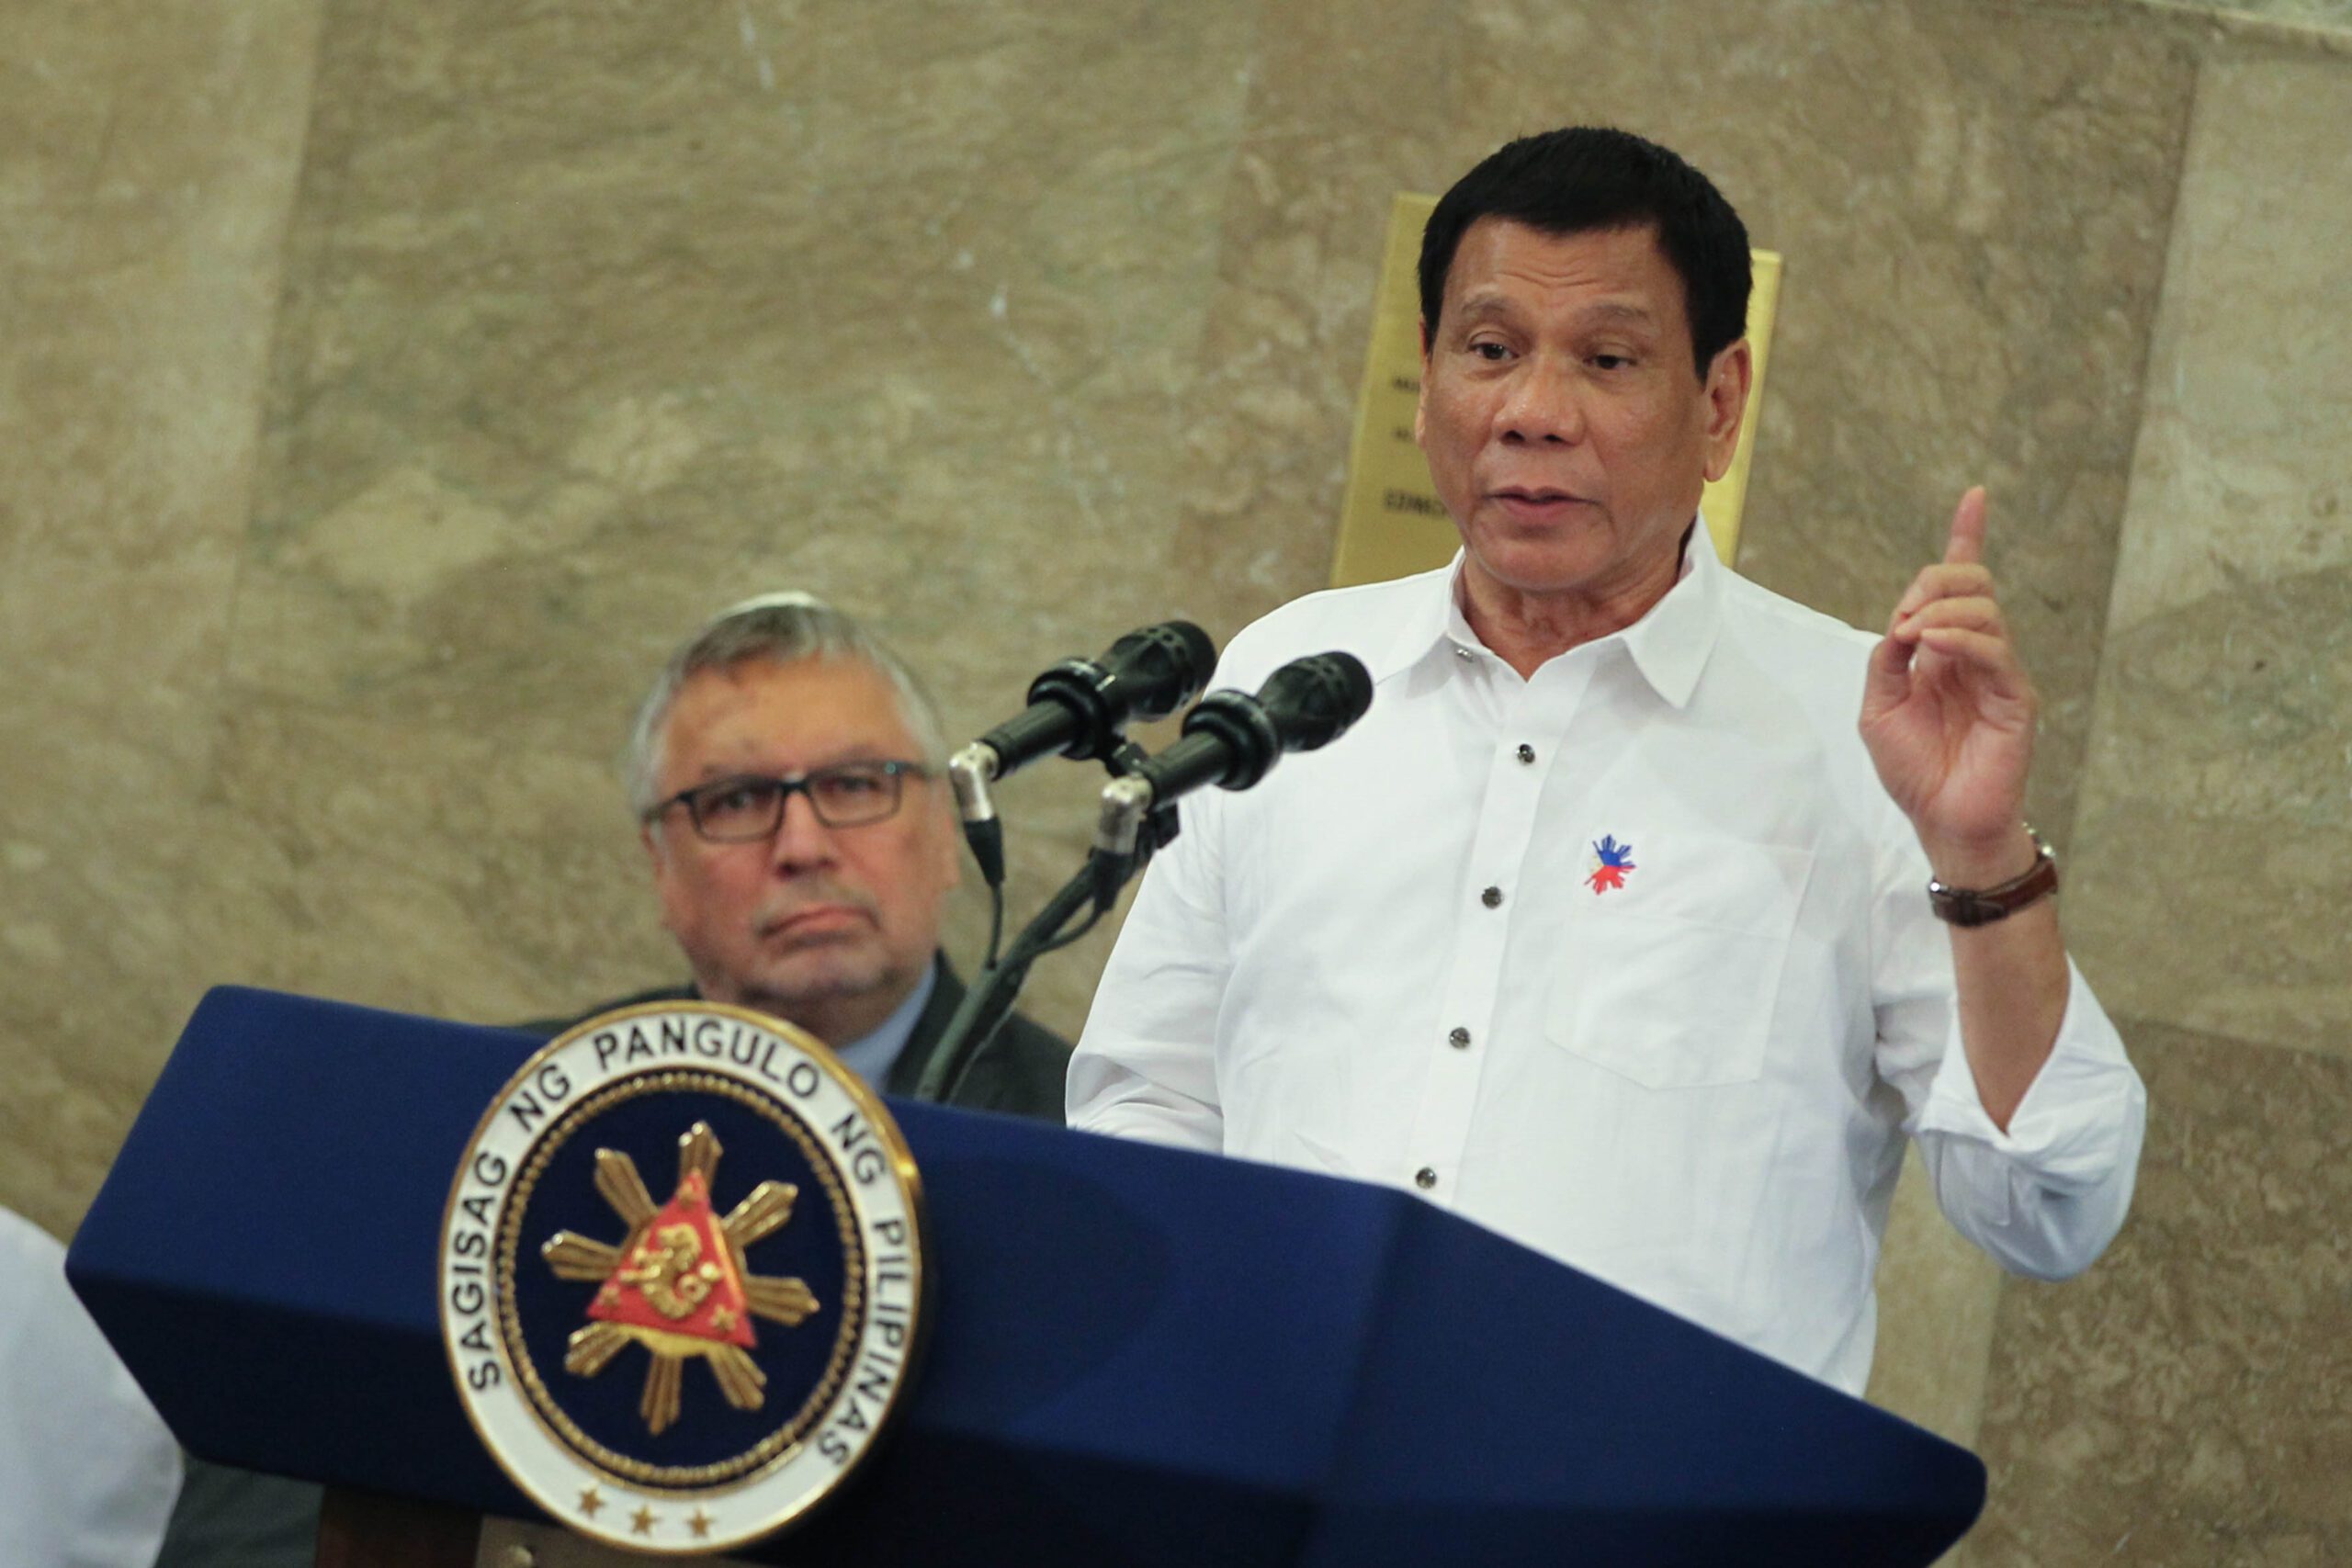 Duterte before China trip: Let’s not dwell on Scarborough Shoal